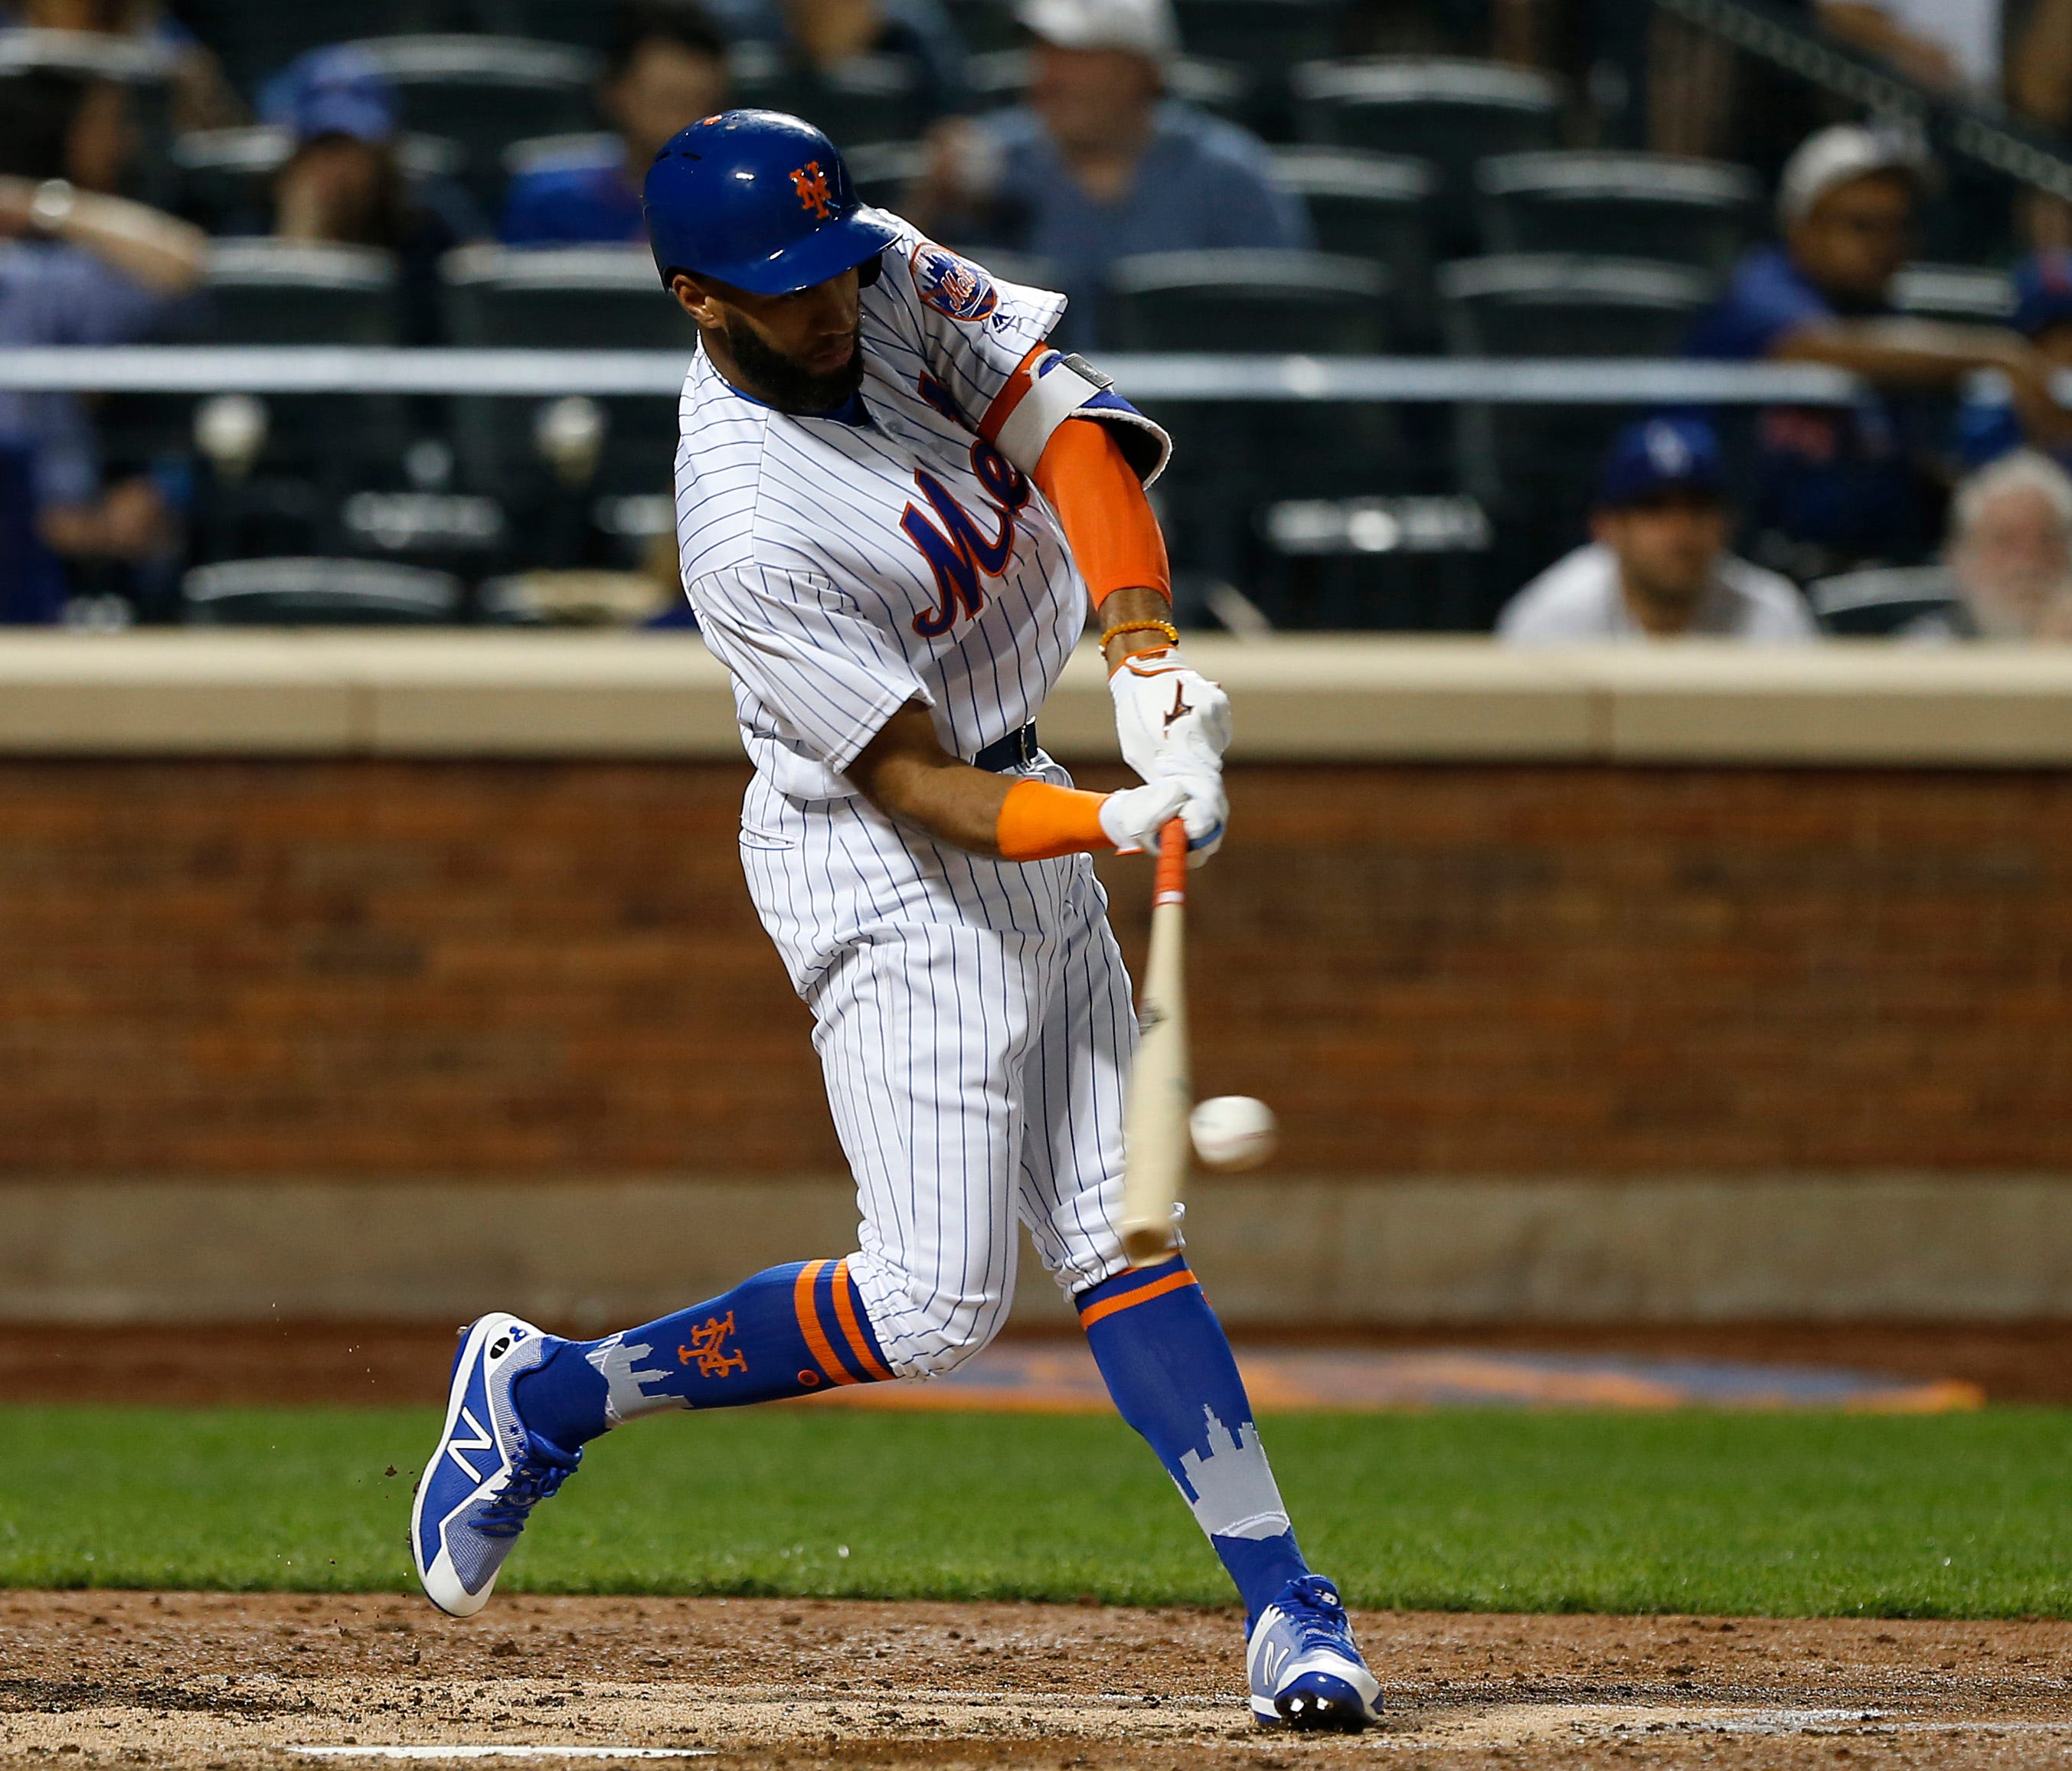 Mets shortstop Amed Rosario hits a single in the fifth inning against the Los Angeles Dodgers at Citi Field on Friday.